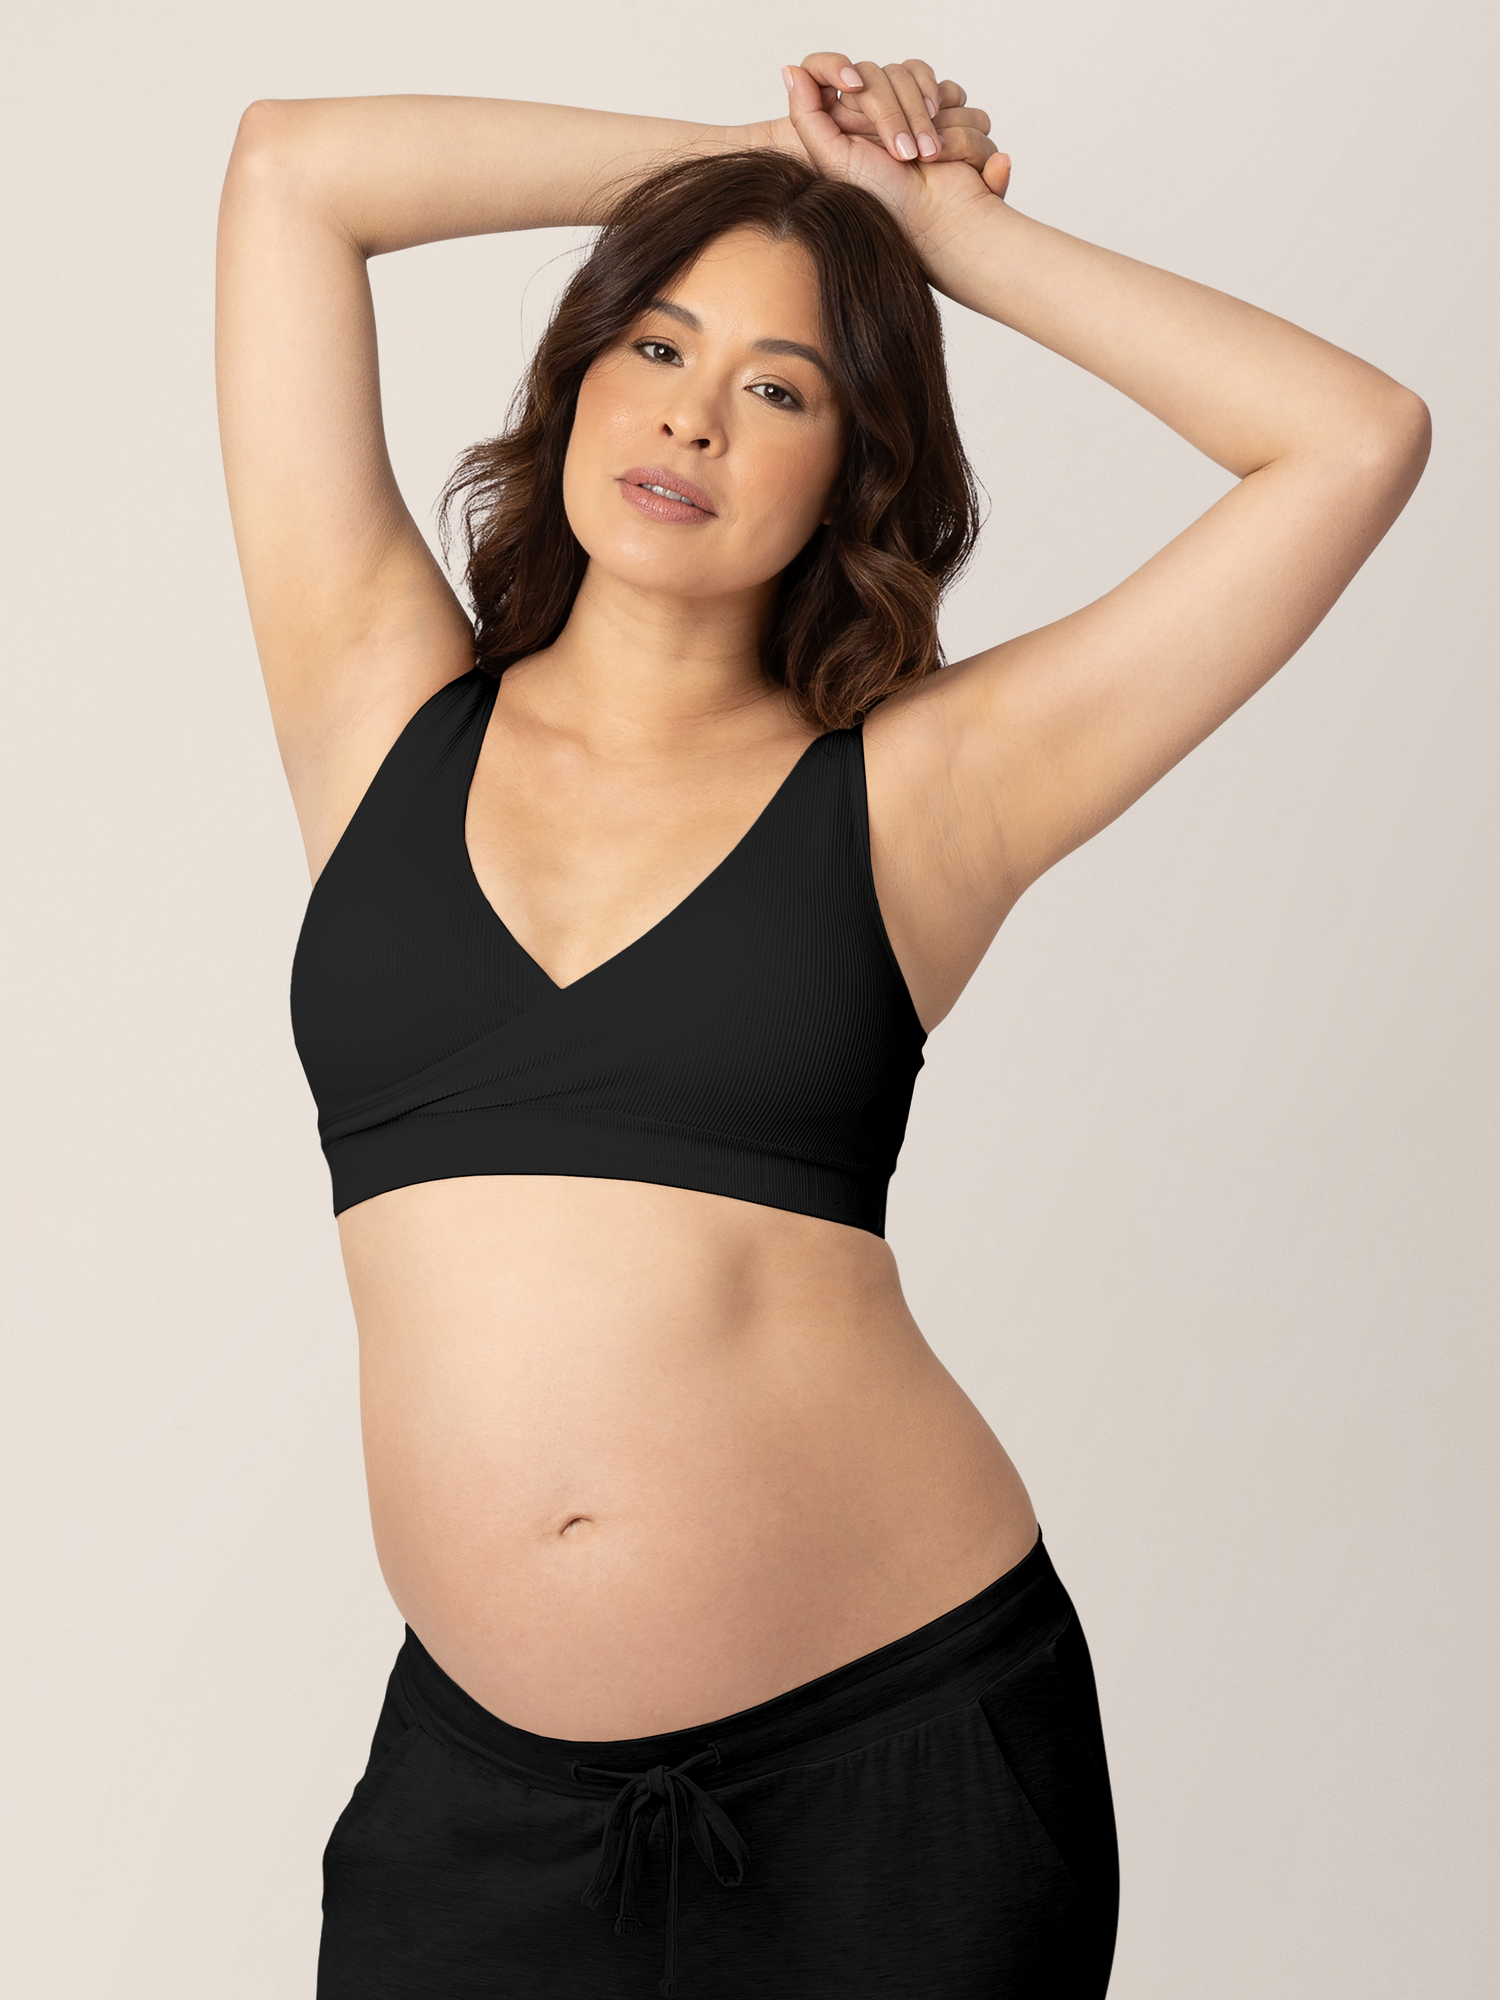 Pregnant model wearing the Sublime® Adjustable Crossover Nursing & Lounge Bra in Black with her hands above her head. @model_info:Vanessa is wearing a Medium.